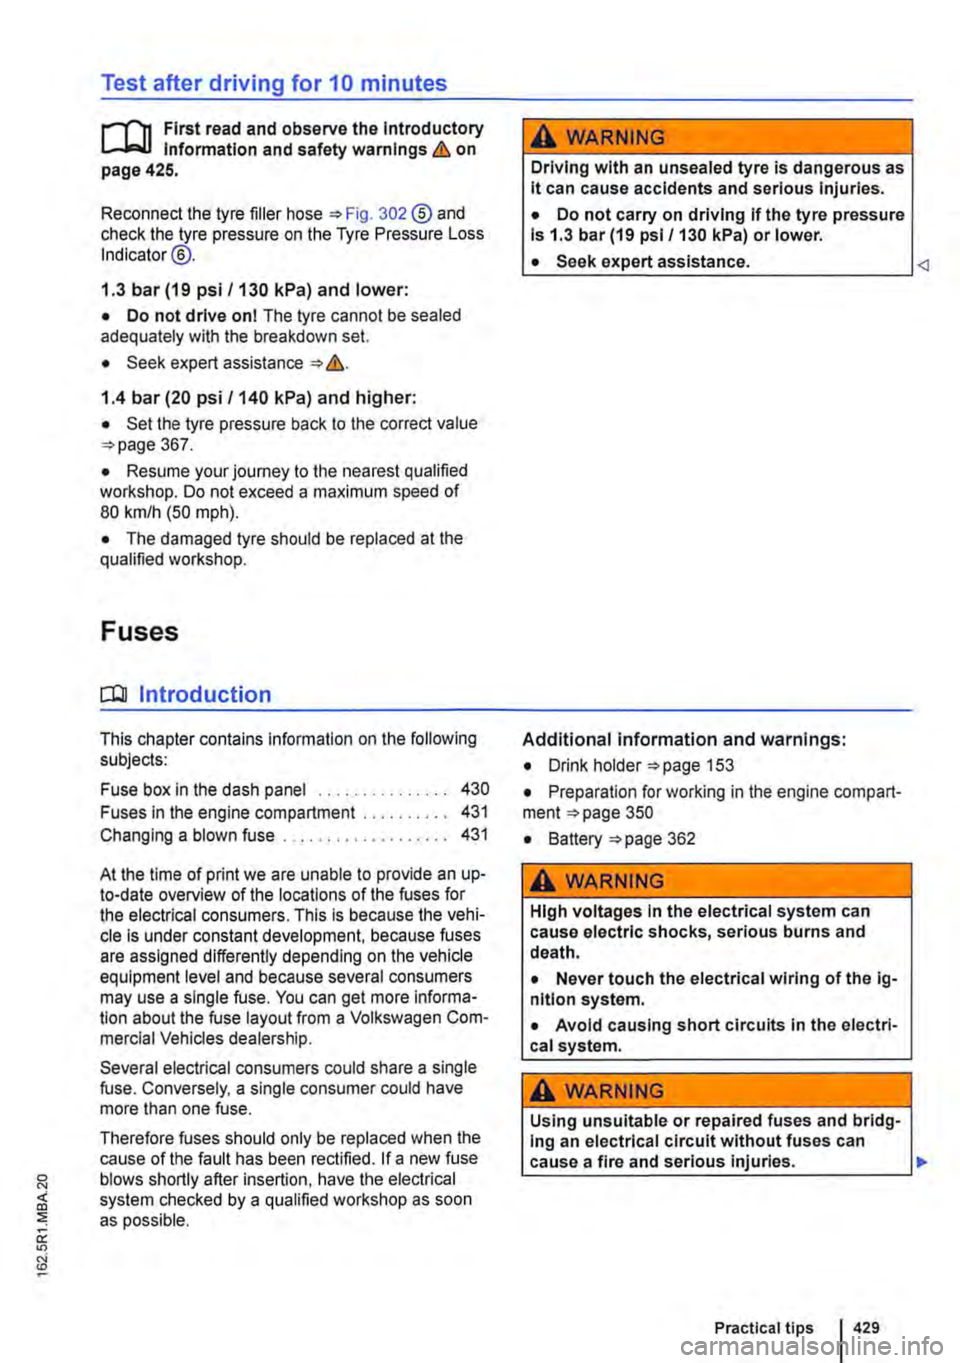 VOLKSWAGEN TRANSPORTER 2013  Owners Manual Test after driving for 10 minutes 
r-(n First read and observe the Introductory L-J,:.LI Information and safety warnings & on page 425. 
Reconnect the tyre filler hose =>Fig. 302 ®and check the tyr